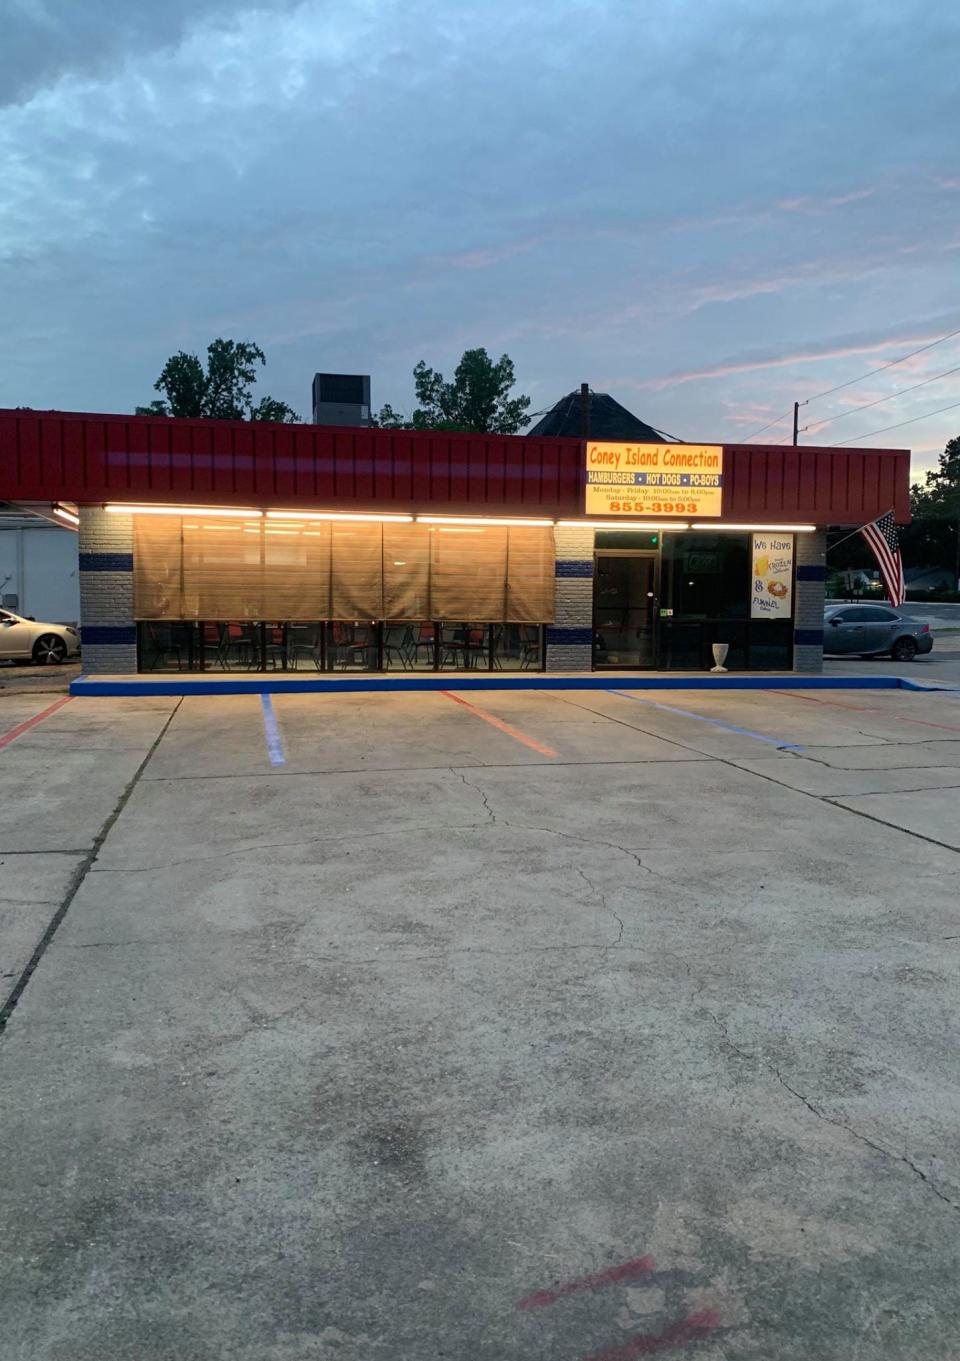 Coney Island Connection, located at 263 N 7th St., West Monroe, is collecting cases of water to travel to Jackson, Mississippi during their current water crisis.